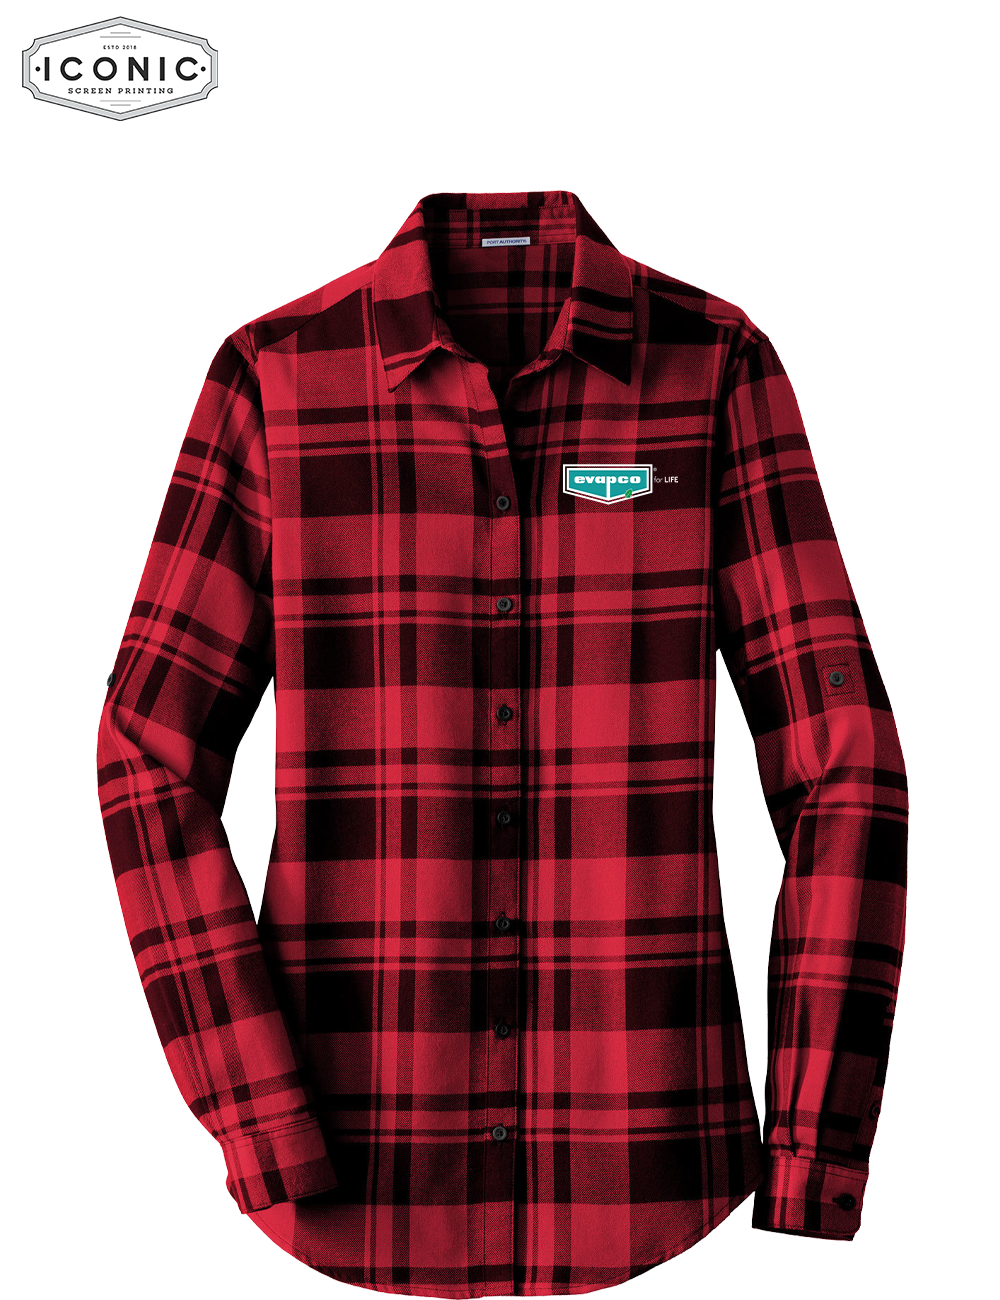 Evapco for Life - Ladies Plaid Flannel Tunic - Embroidery